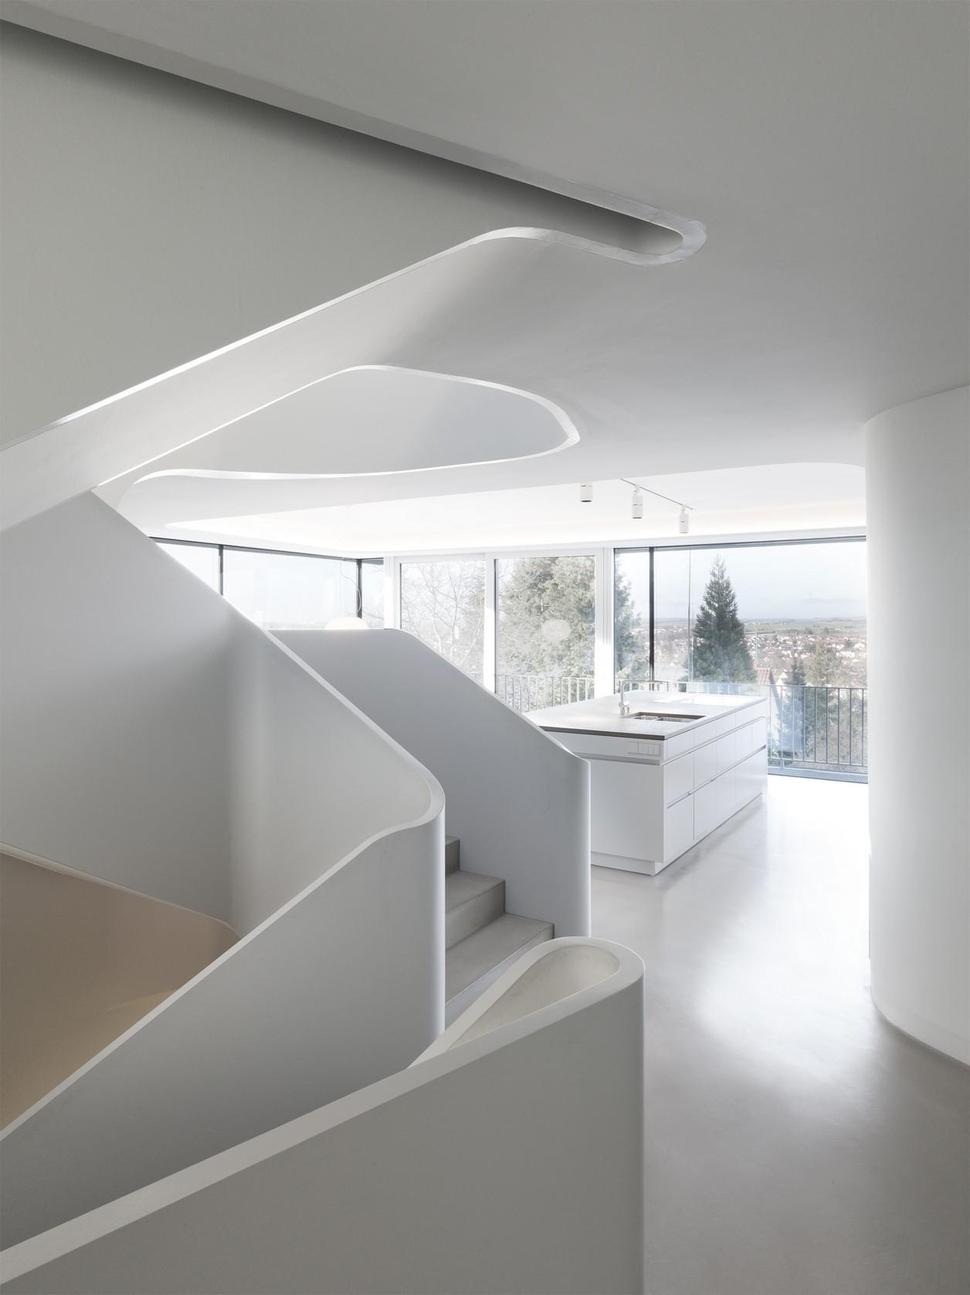 angular-modern-home-features-large-curvaceous-stairwell-inside-12-kitchen.jpg